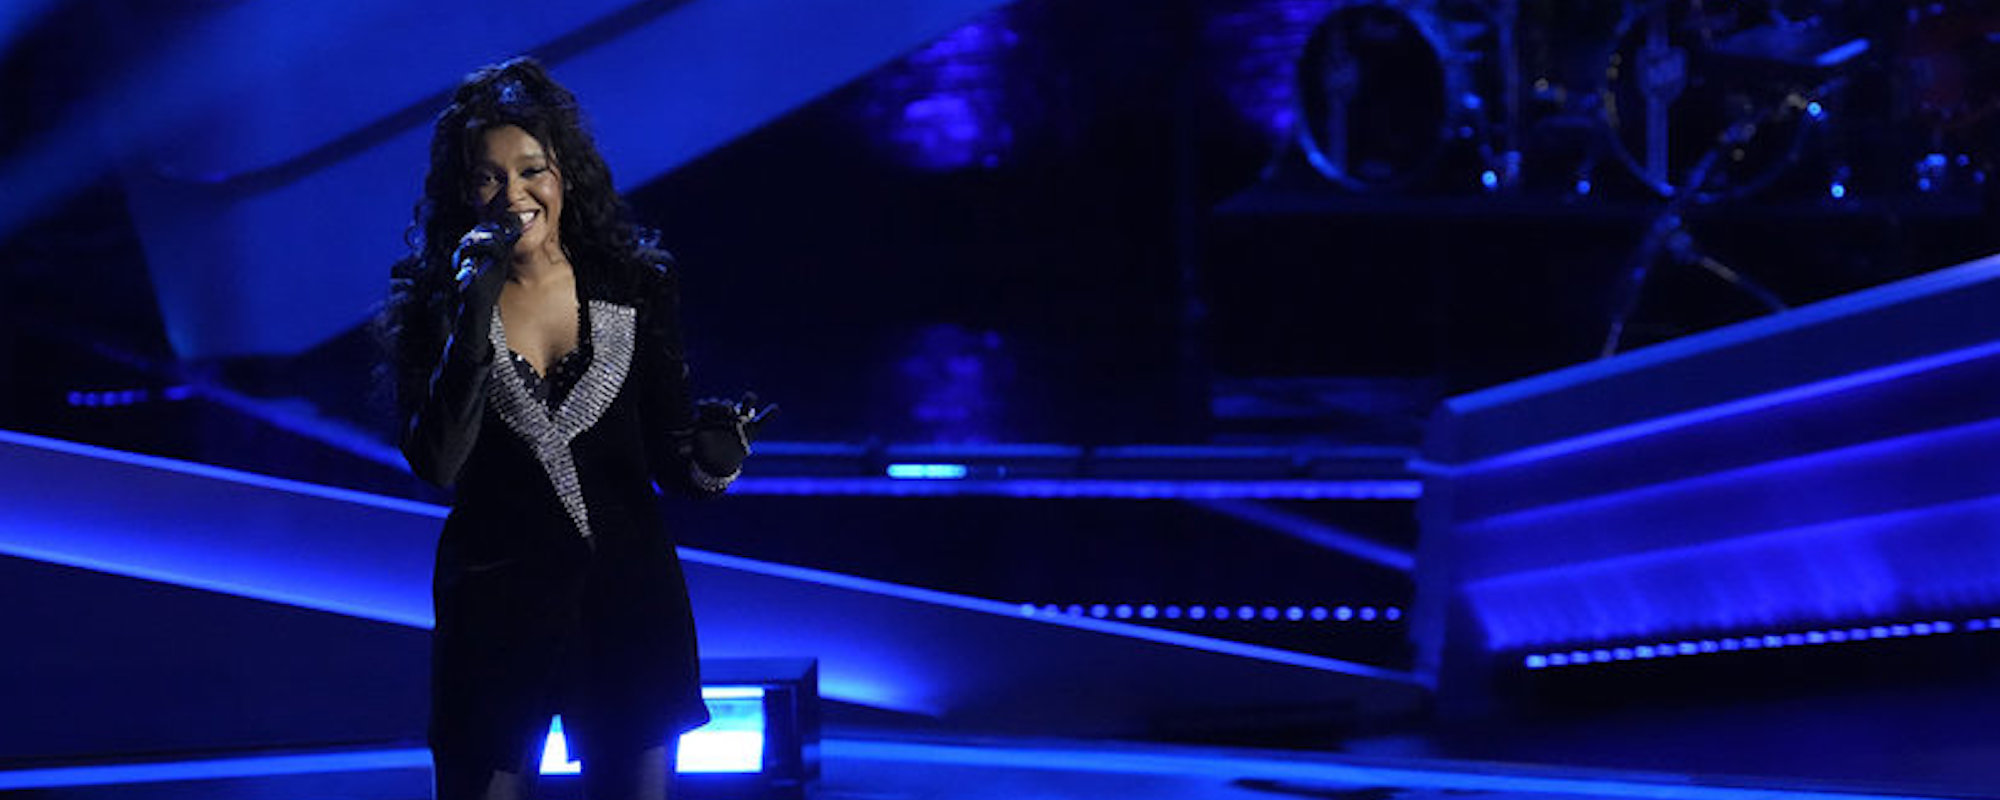 Chechi Sarai Hits High Notes with Soul Classic “Lovin’ You” for Four-Chair Turn on ‘The Voice’